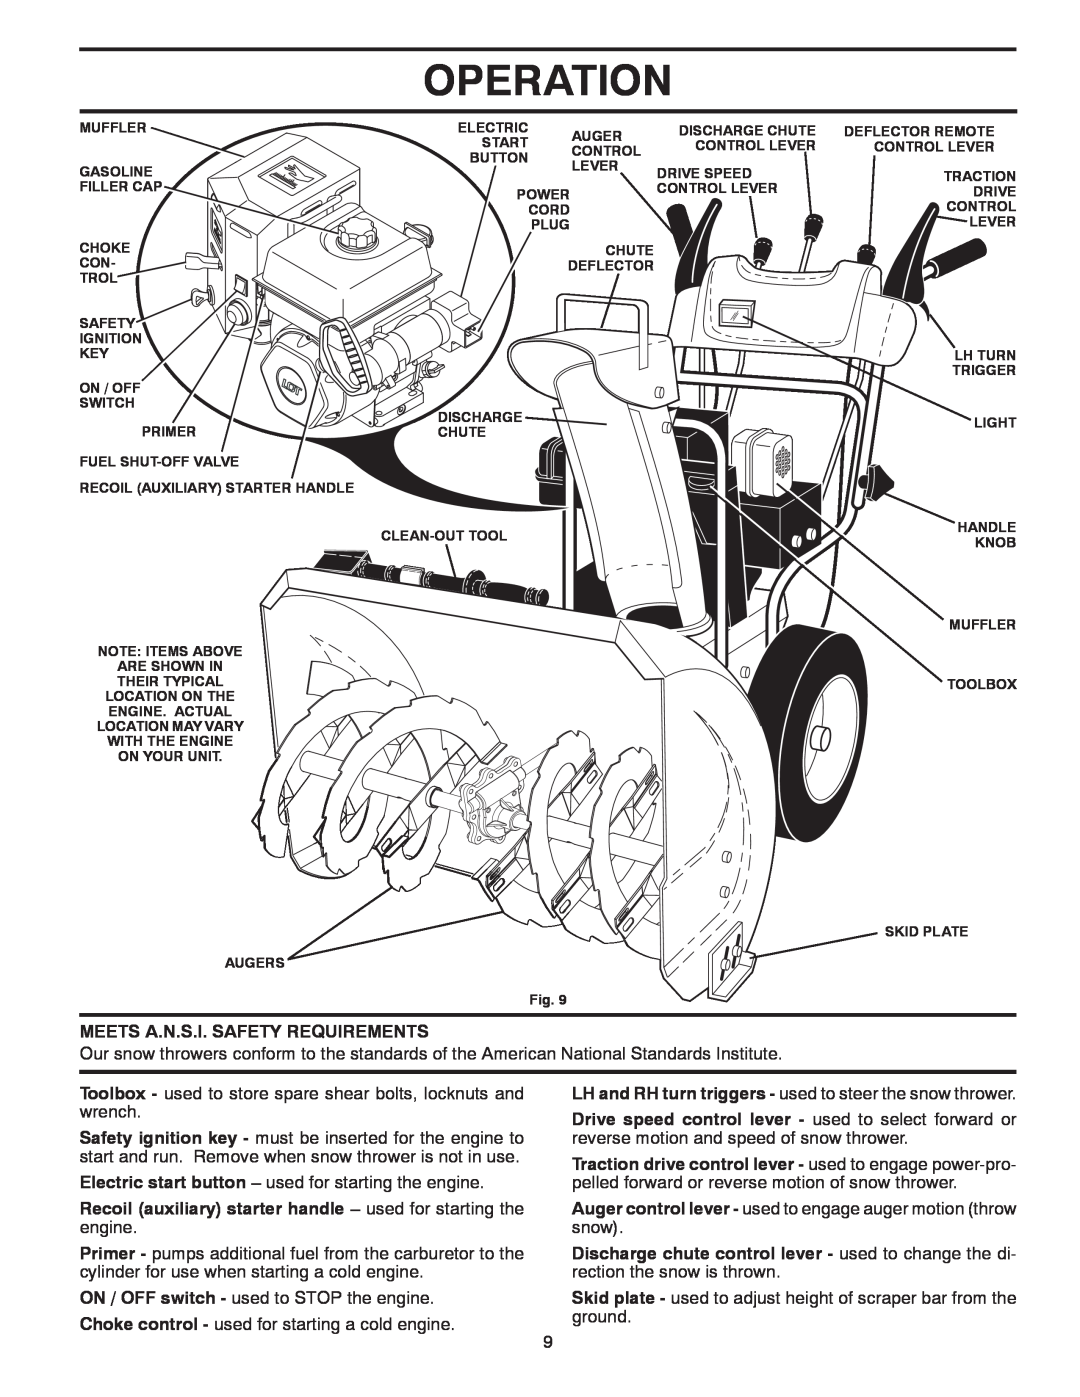 Poulan 435551 owner manual Operation, Meets A.N.S.I. Safety Requirements 